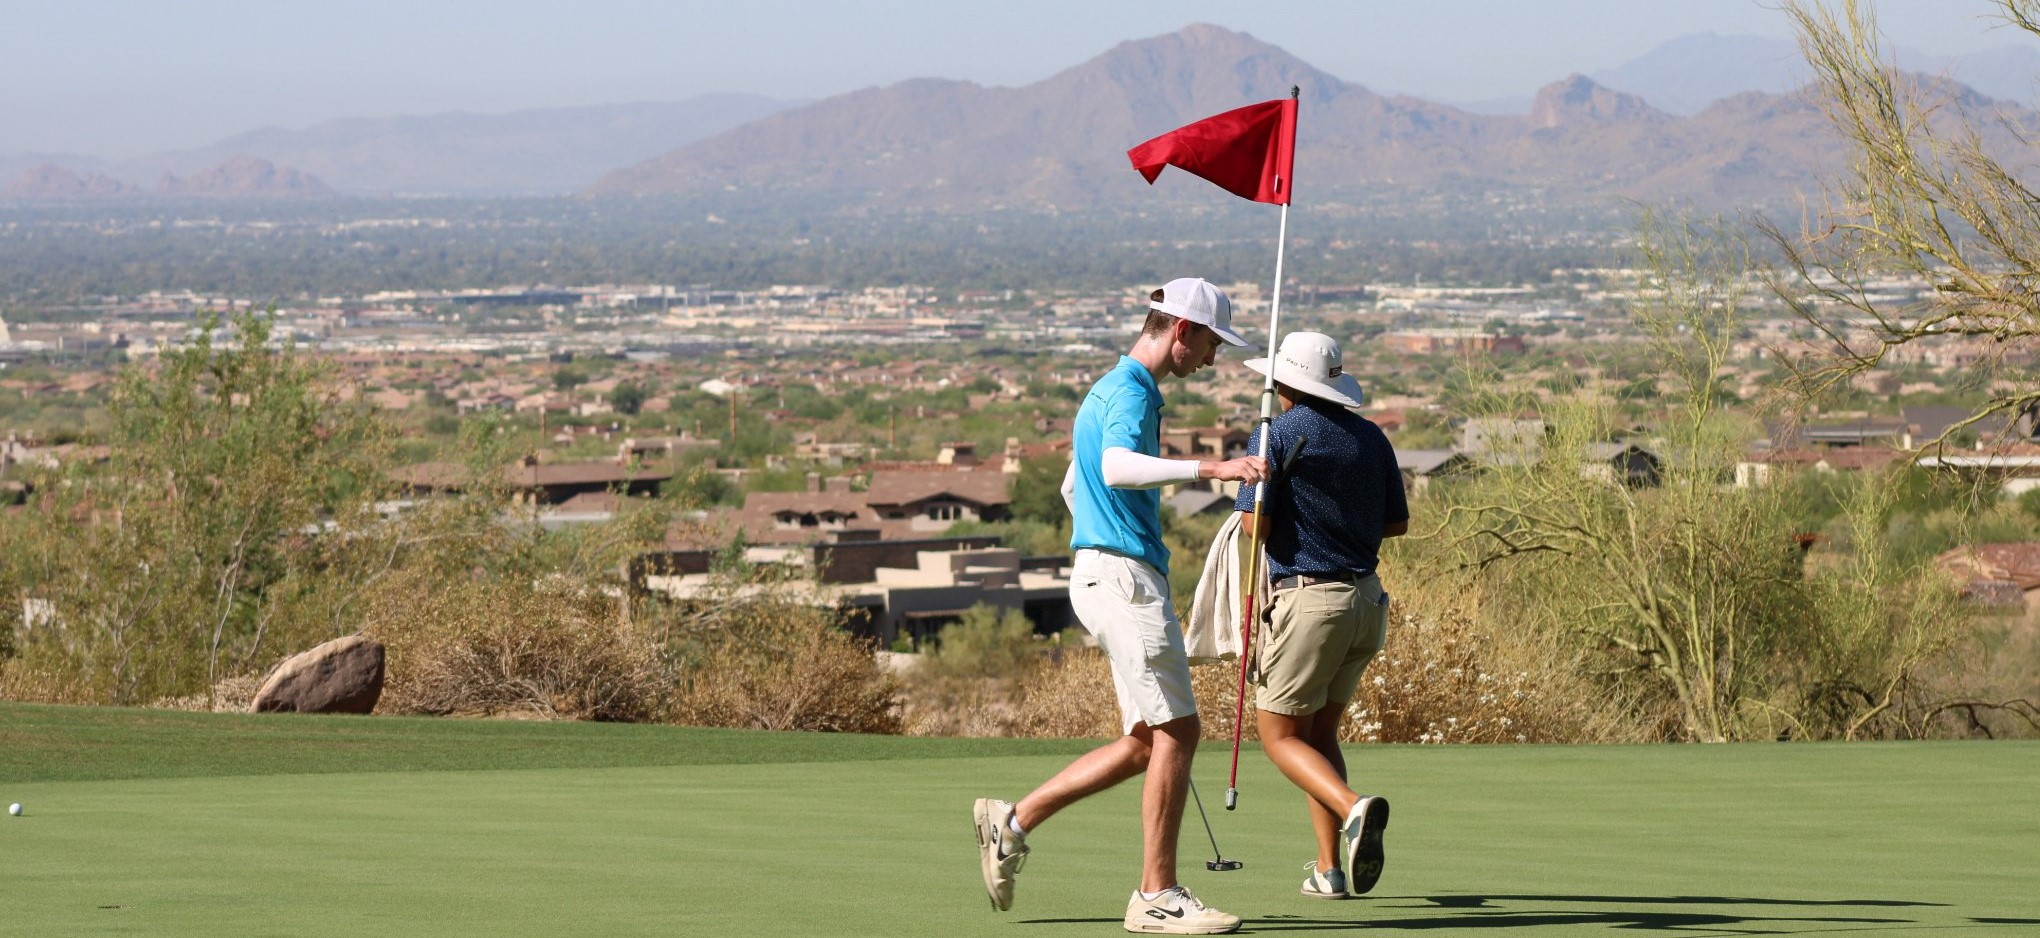 Non-Golfers Increasingly See the Game in a Positive Light